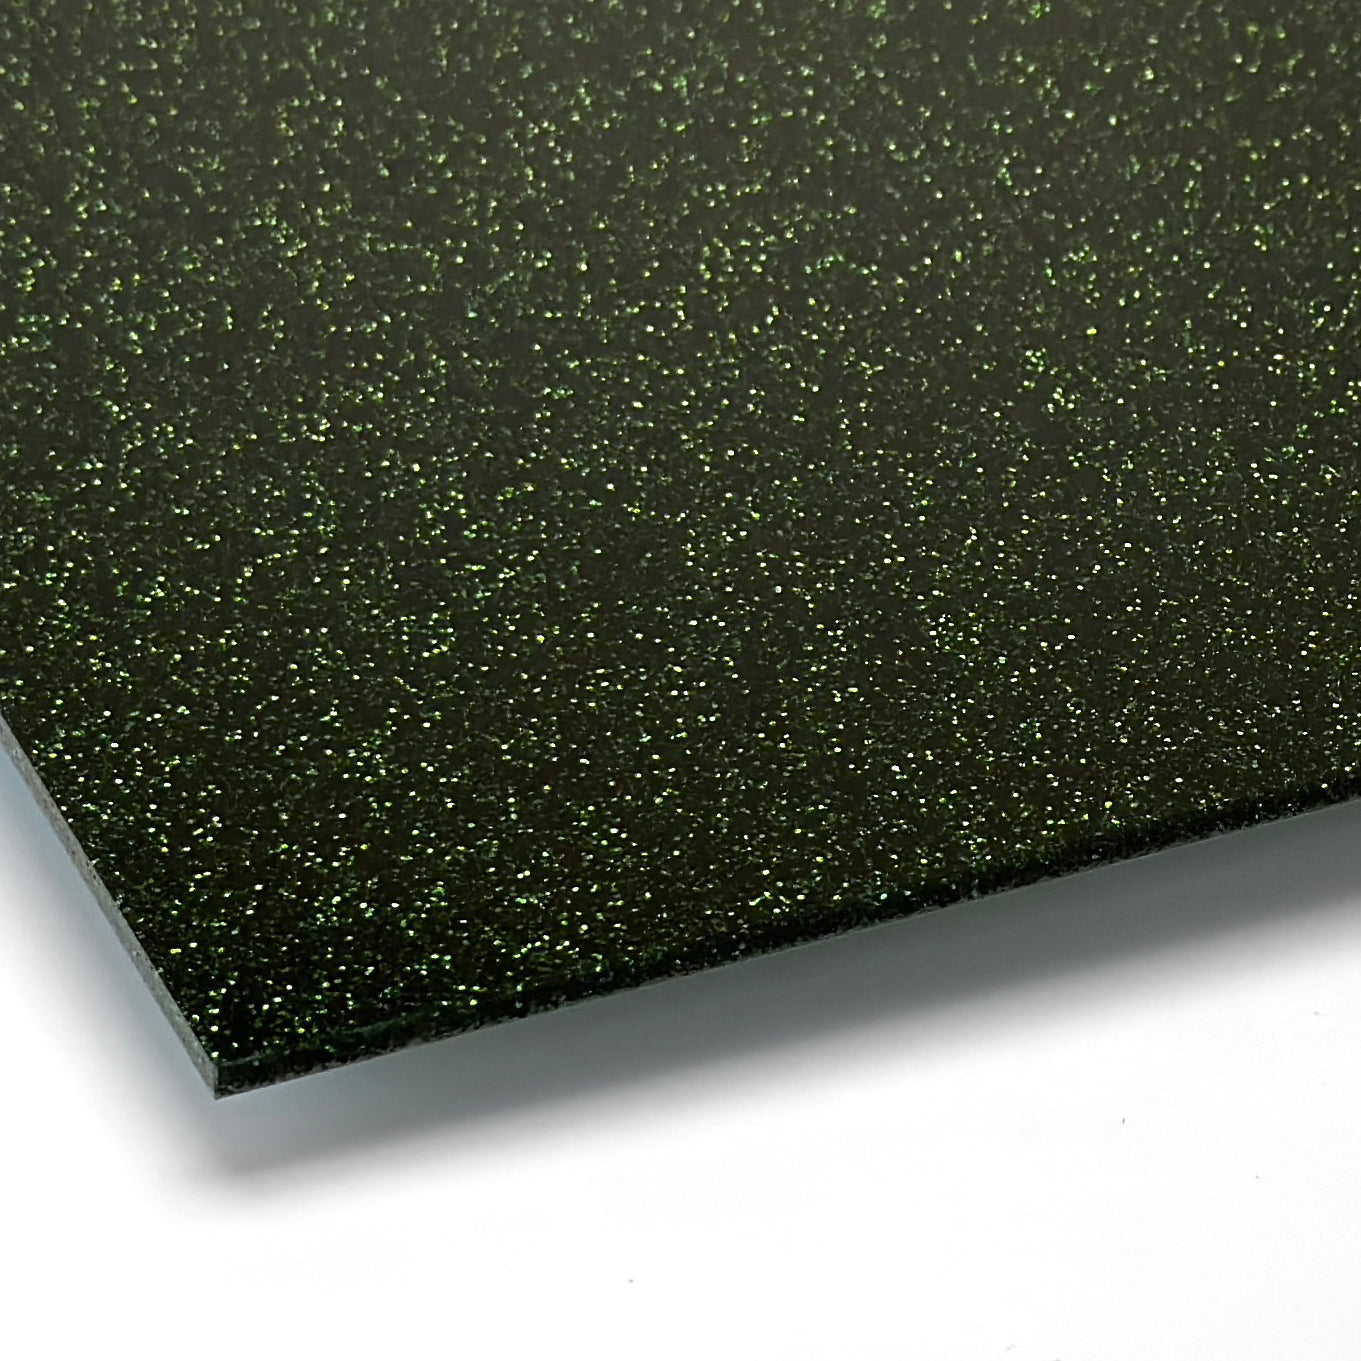 Glitter Forest Green Acrylic with laser cutting & printing - 600x400mm